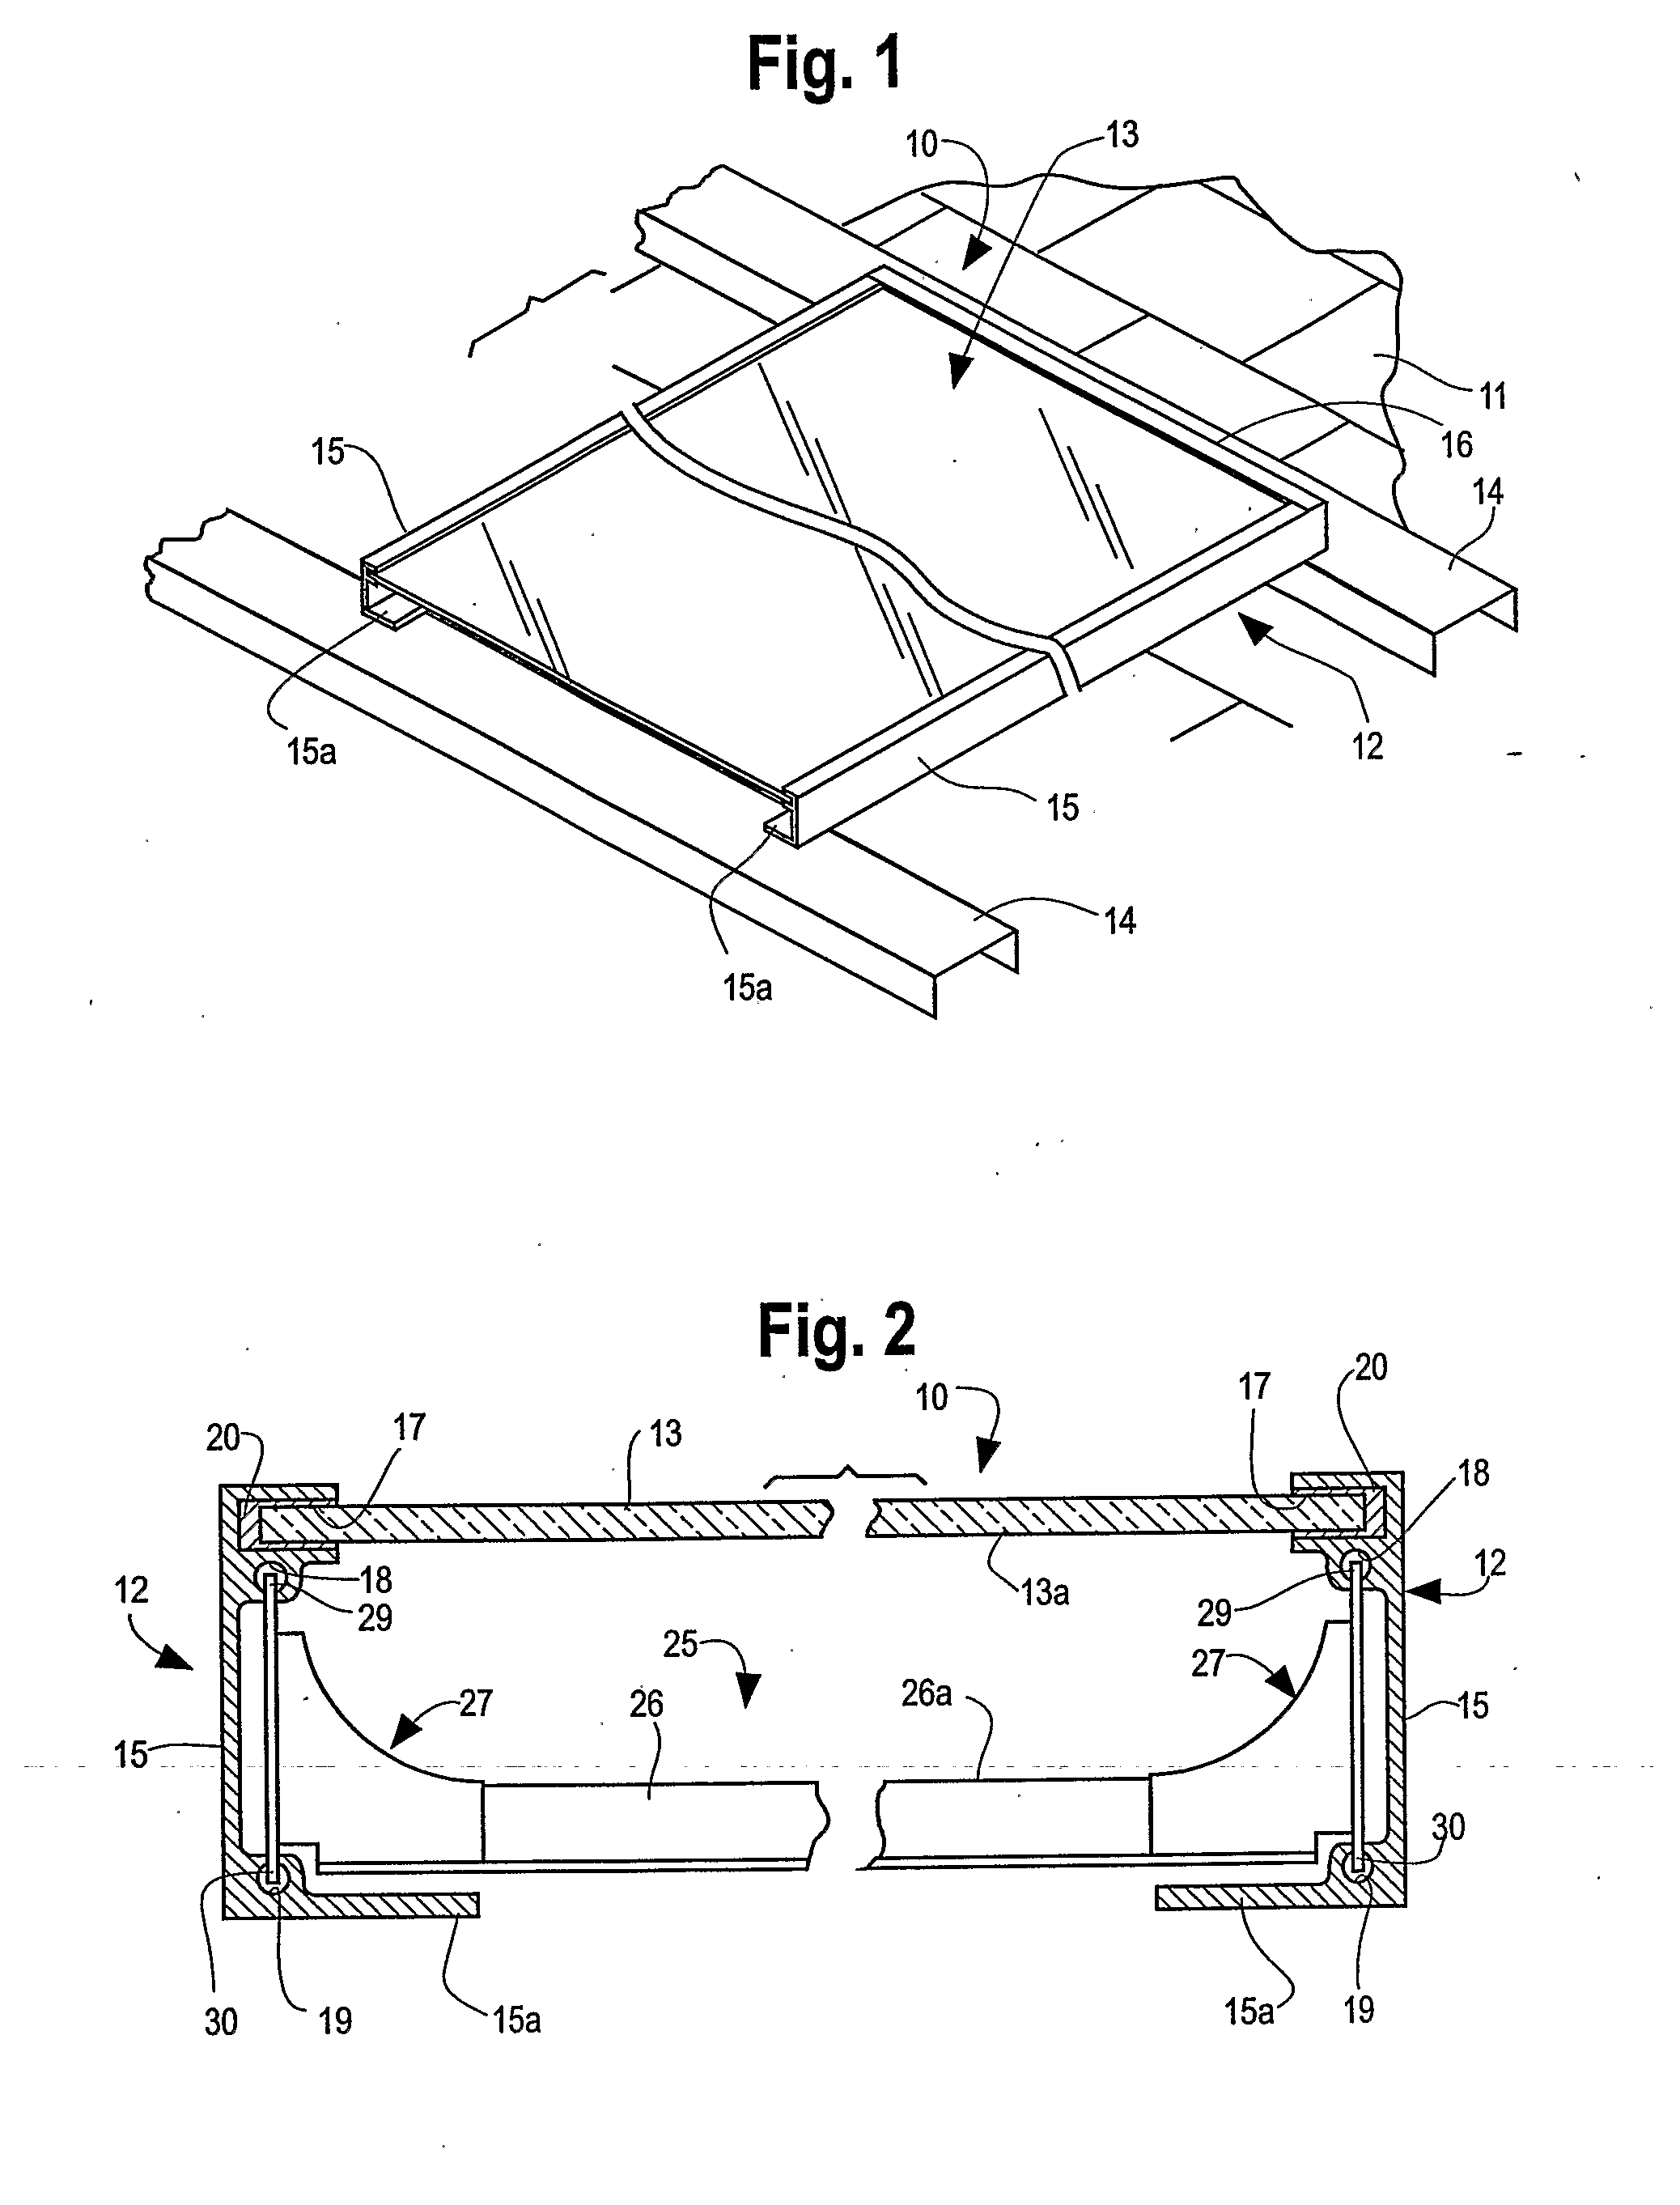 Method and Apparatus for Preventing Distortion of a Framed Solar Module